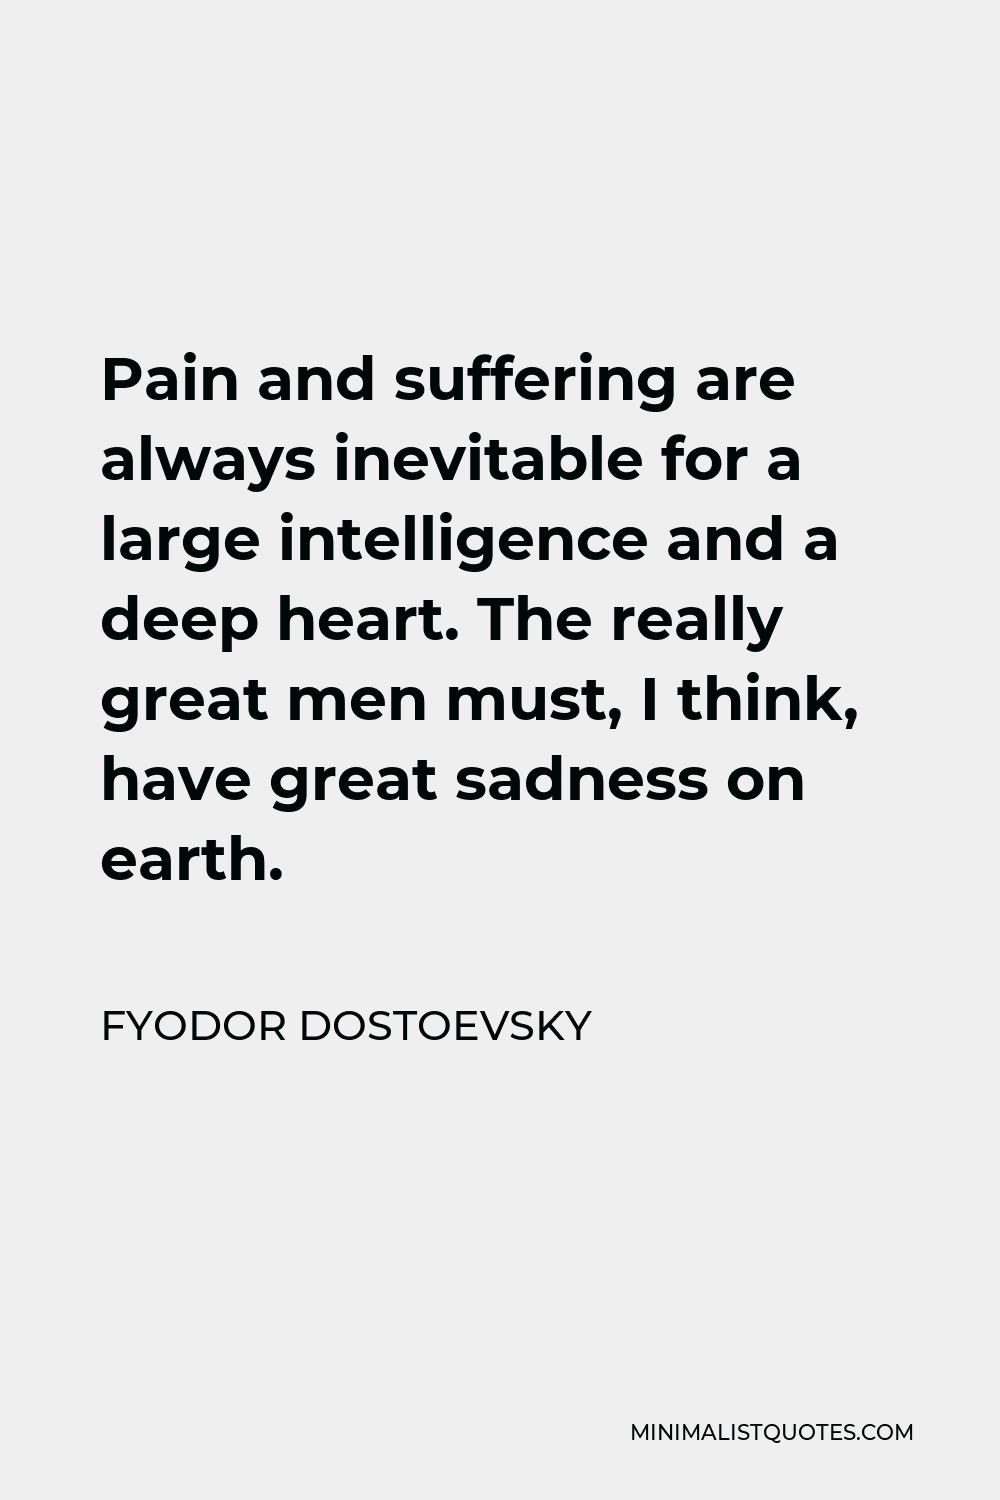 Fyodor Dostoevsky Quote - Pain and suffering are always inevitable for a large intelligence and a deep heart. The really great men must, I think, have great sadness on earth.